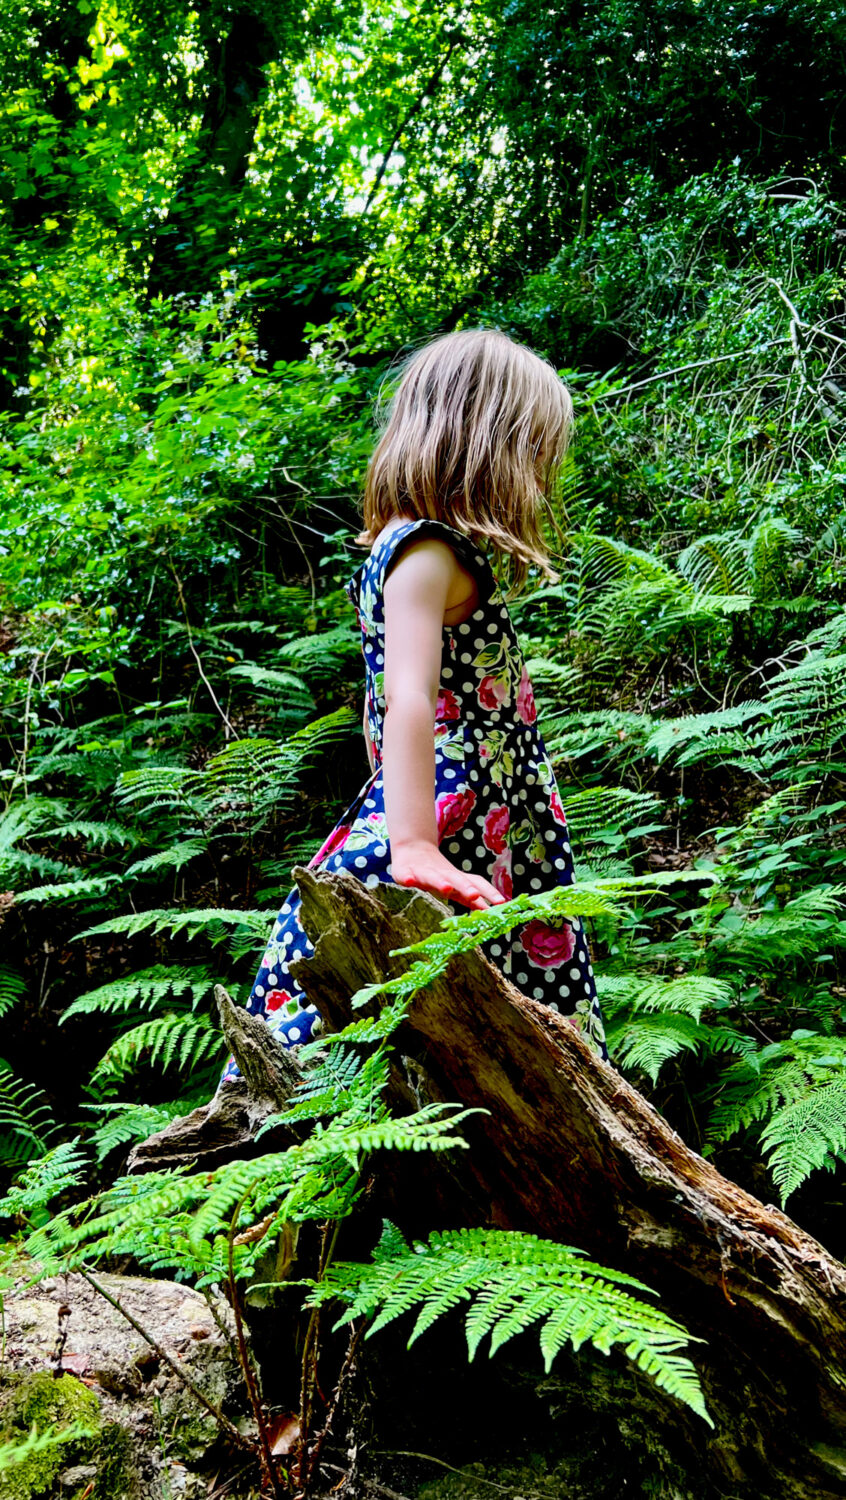 Young girl in dress walking through Sussex woodland with ferns